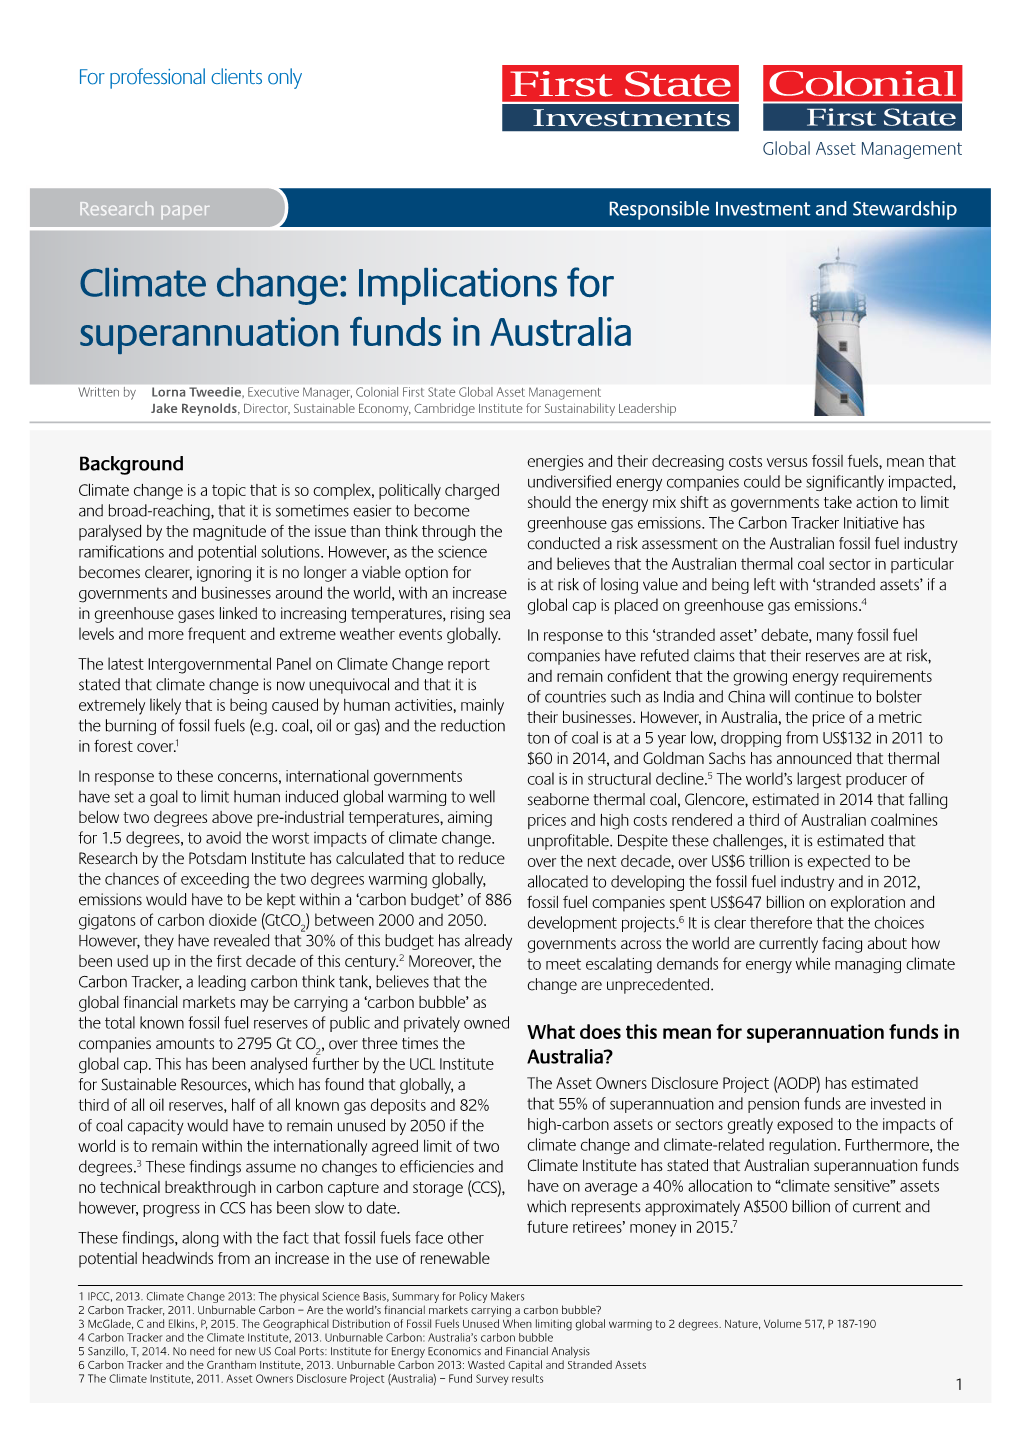 Climate Change: Implications for Superannuation Funds in Australia